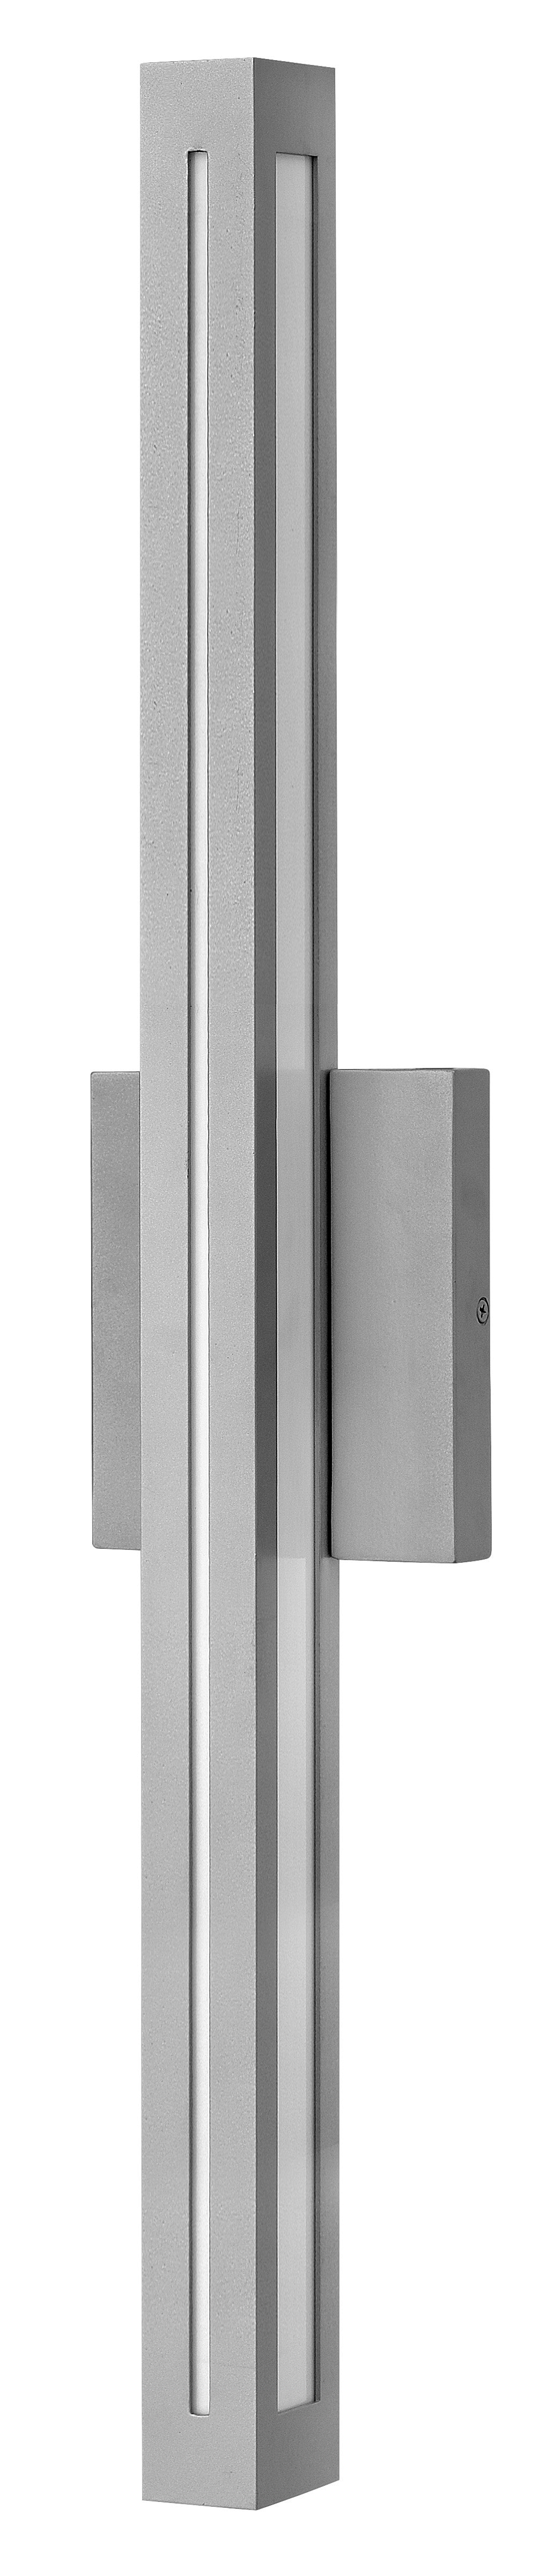 VUE Outdoor sconce Stainless steel INTEGRATED LED - 12314TT | HINKLEY